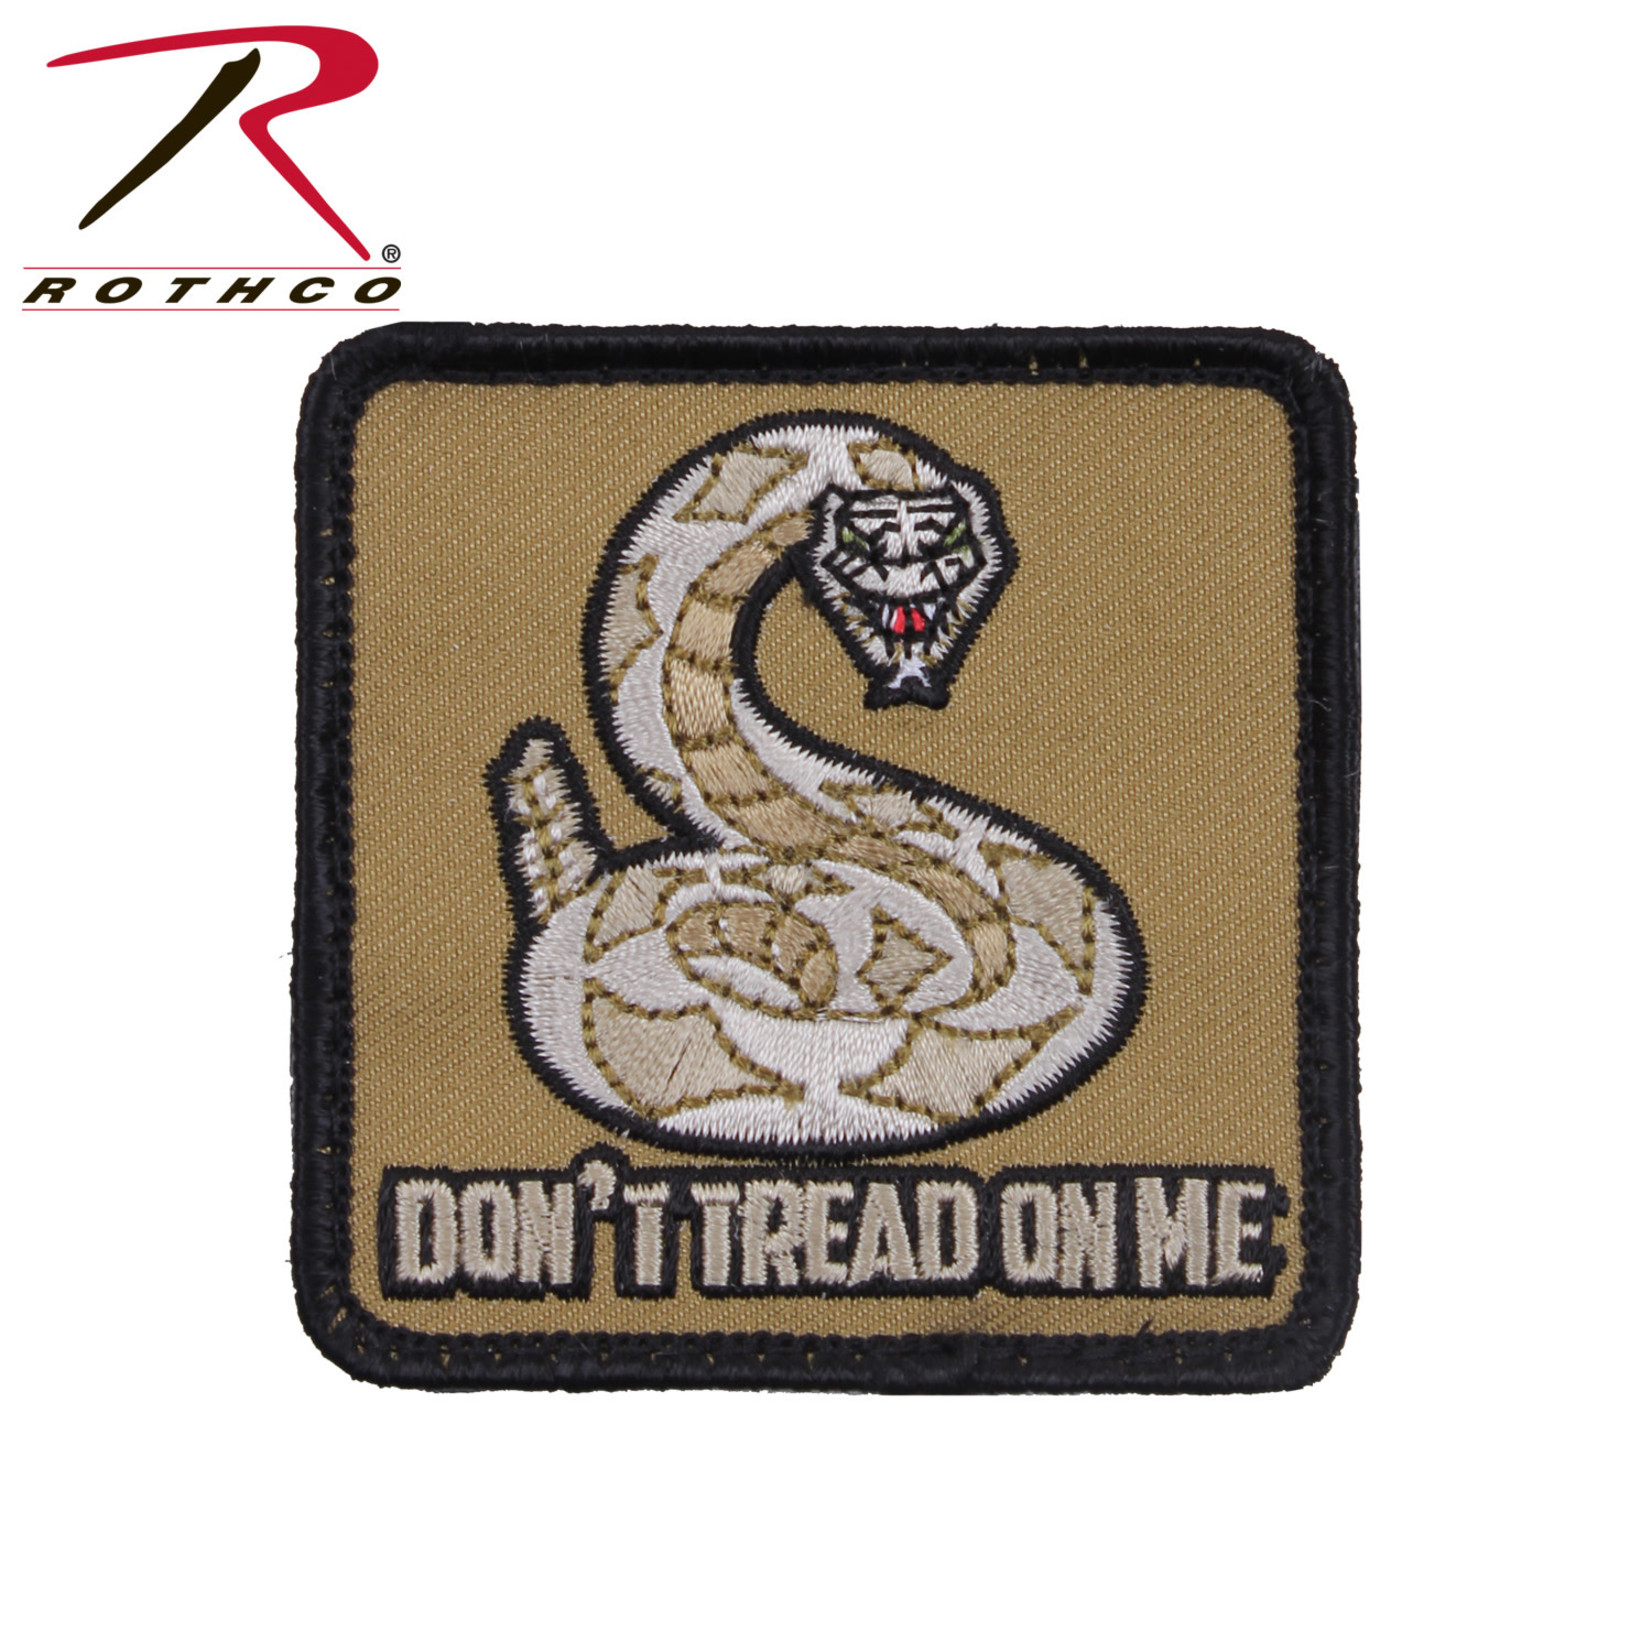 Rothco Rothco Don't Tread On Me Morale Patch